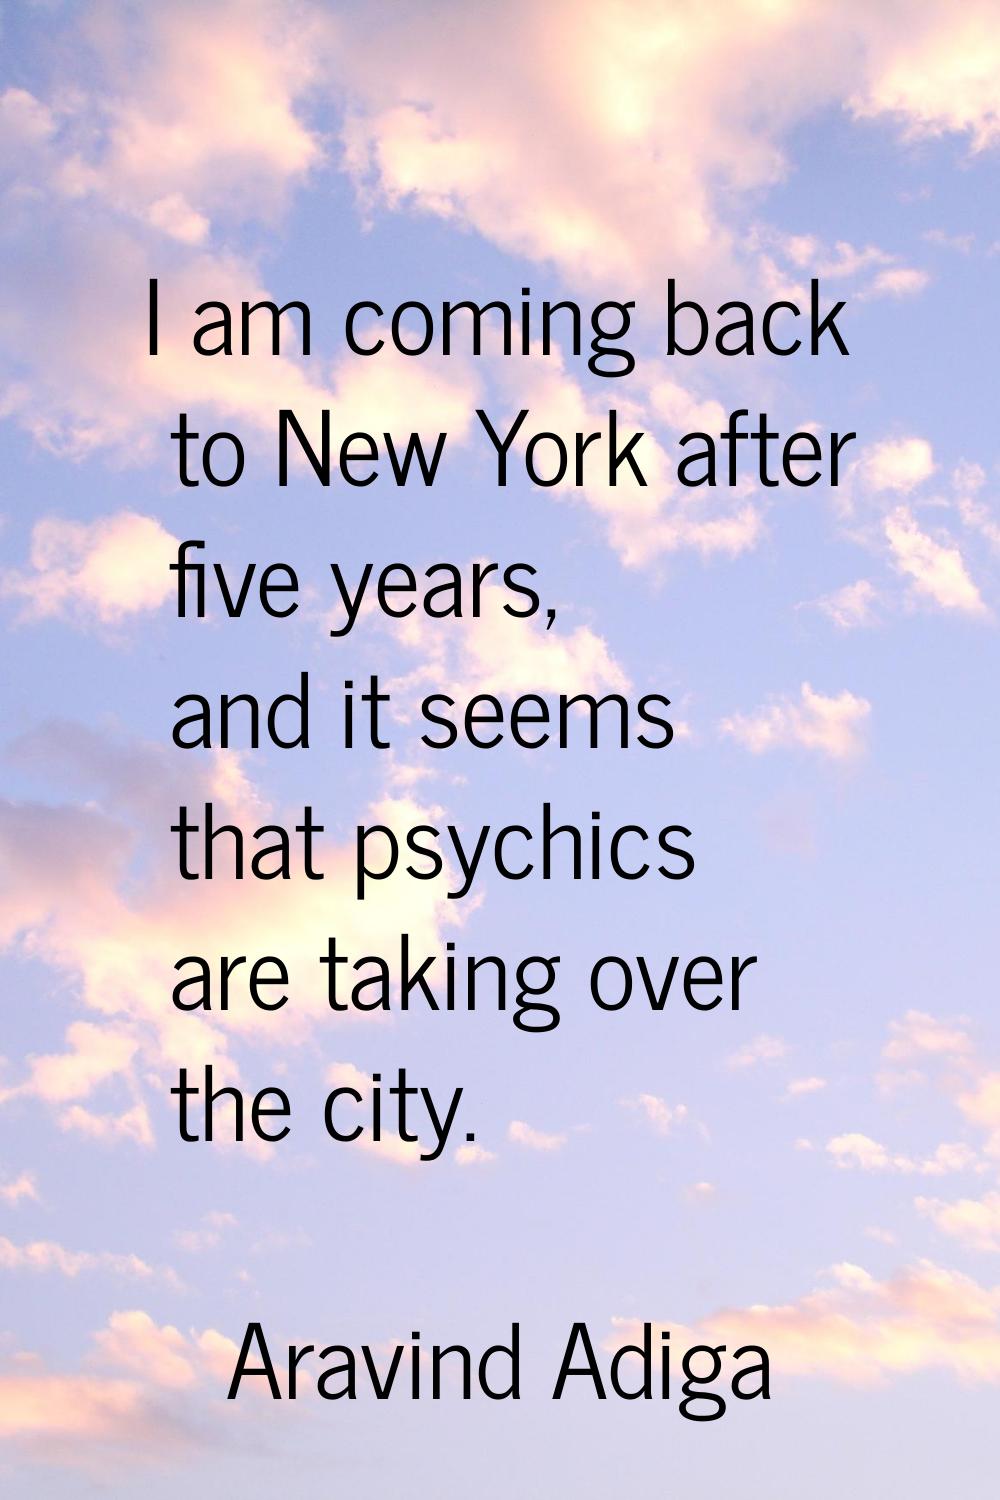 I am coming back to New York after five years, and it seems that psychics are taking over the city.